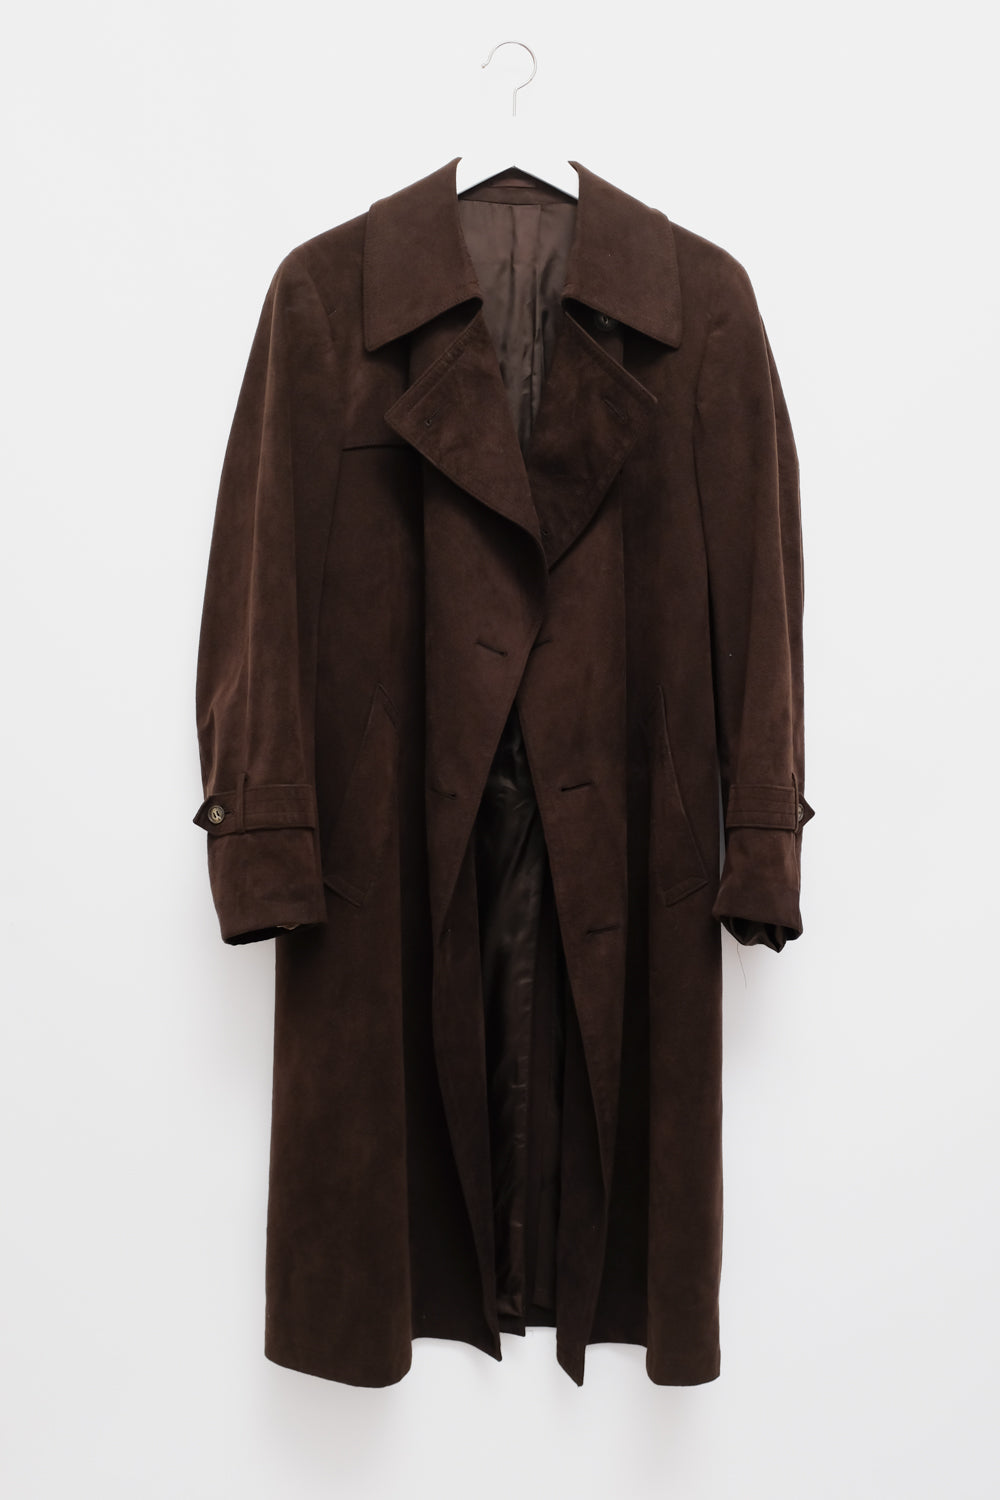 VINTAGE CHOCOLATE FAUX SUEDE TRENCH COAT